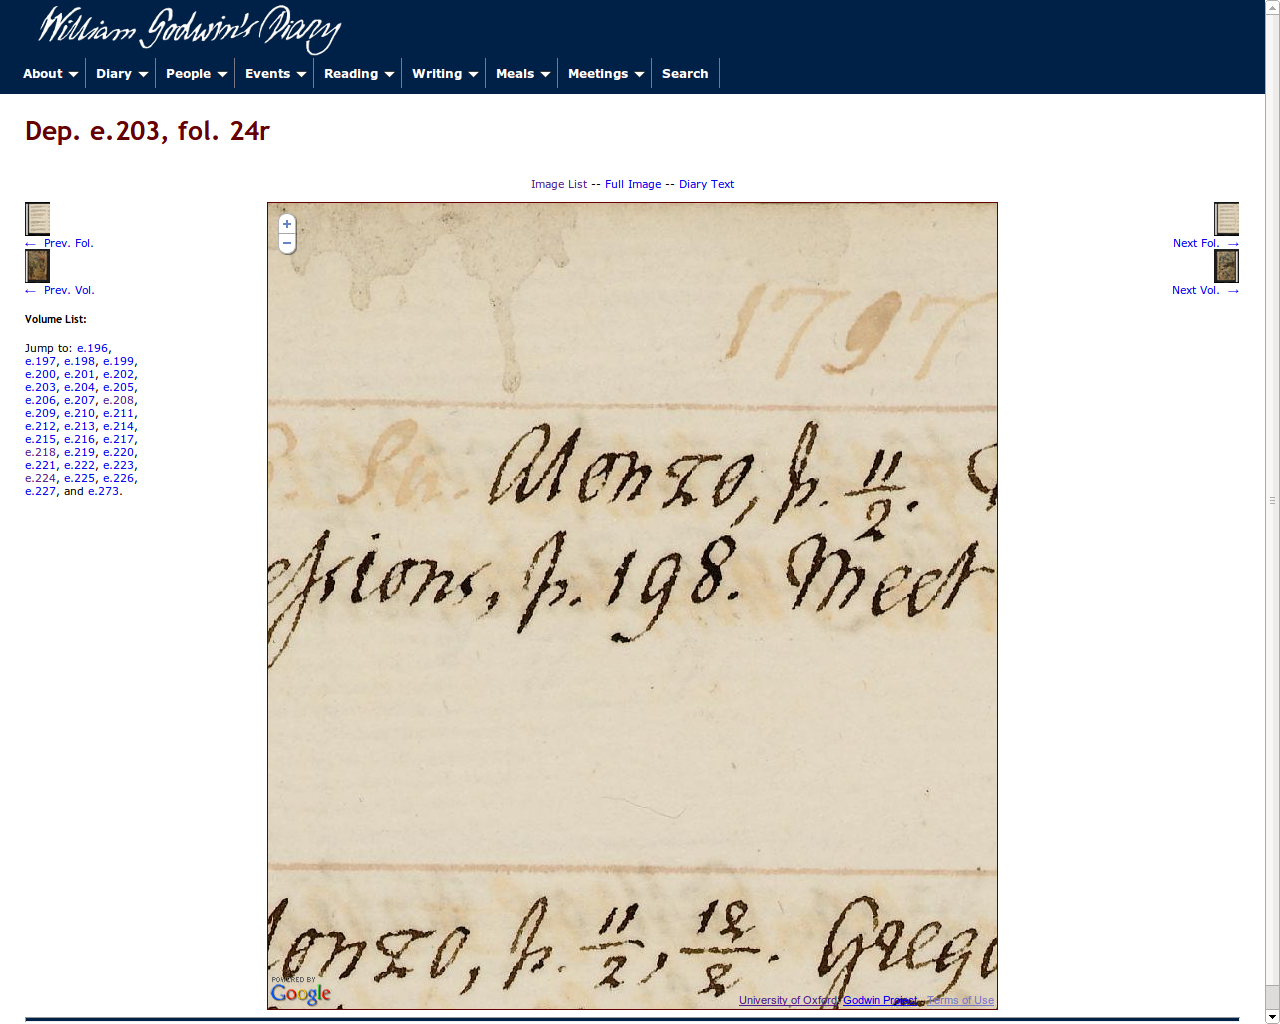 Screenshot of _William Godwin’s Diary_ website with a manuscript page in the middle zoomed in to show only a few letters.